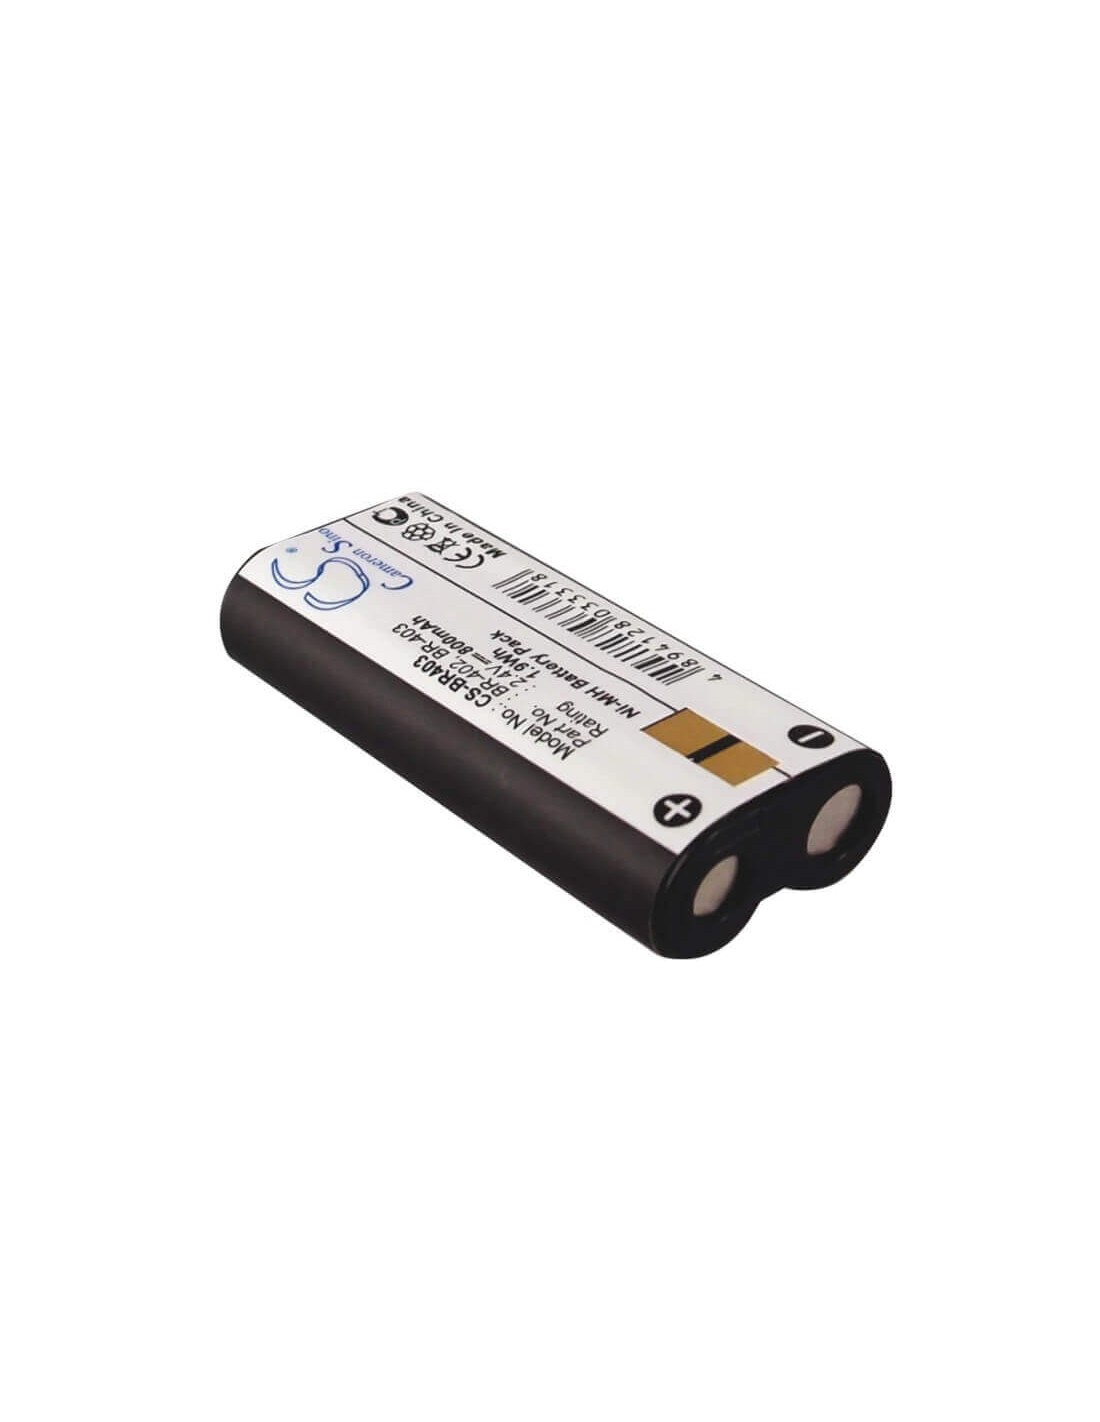 Battery for Olympus Ds-2300, Ds-3300, Ds-4000, Ds-5000, 2.4V, 800mAh - 1.92Wh